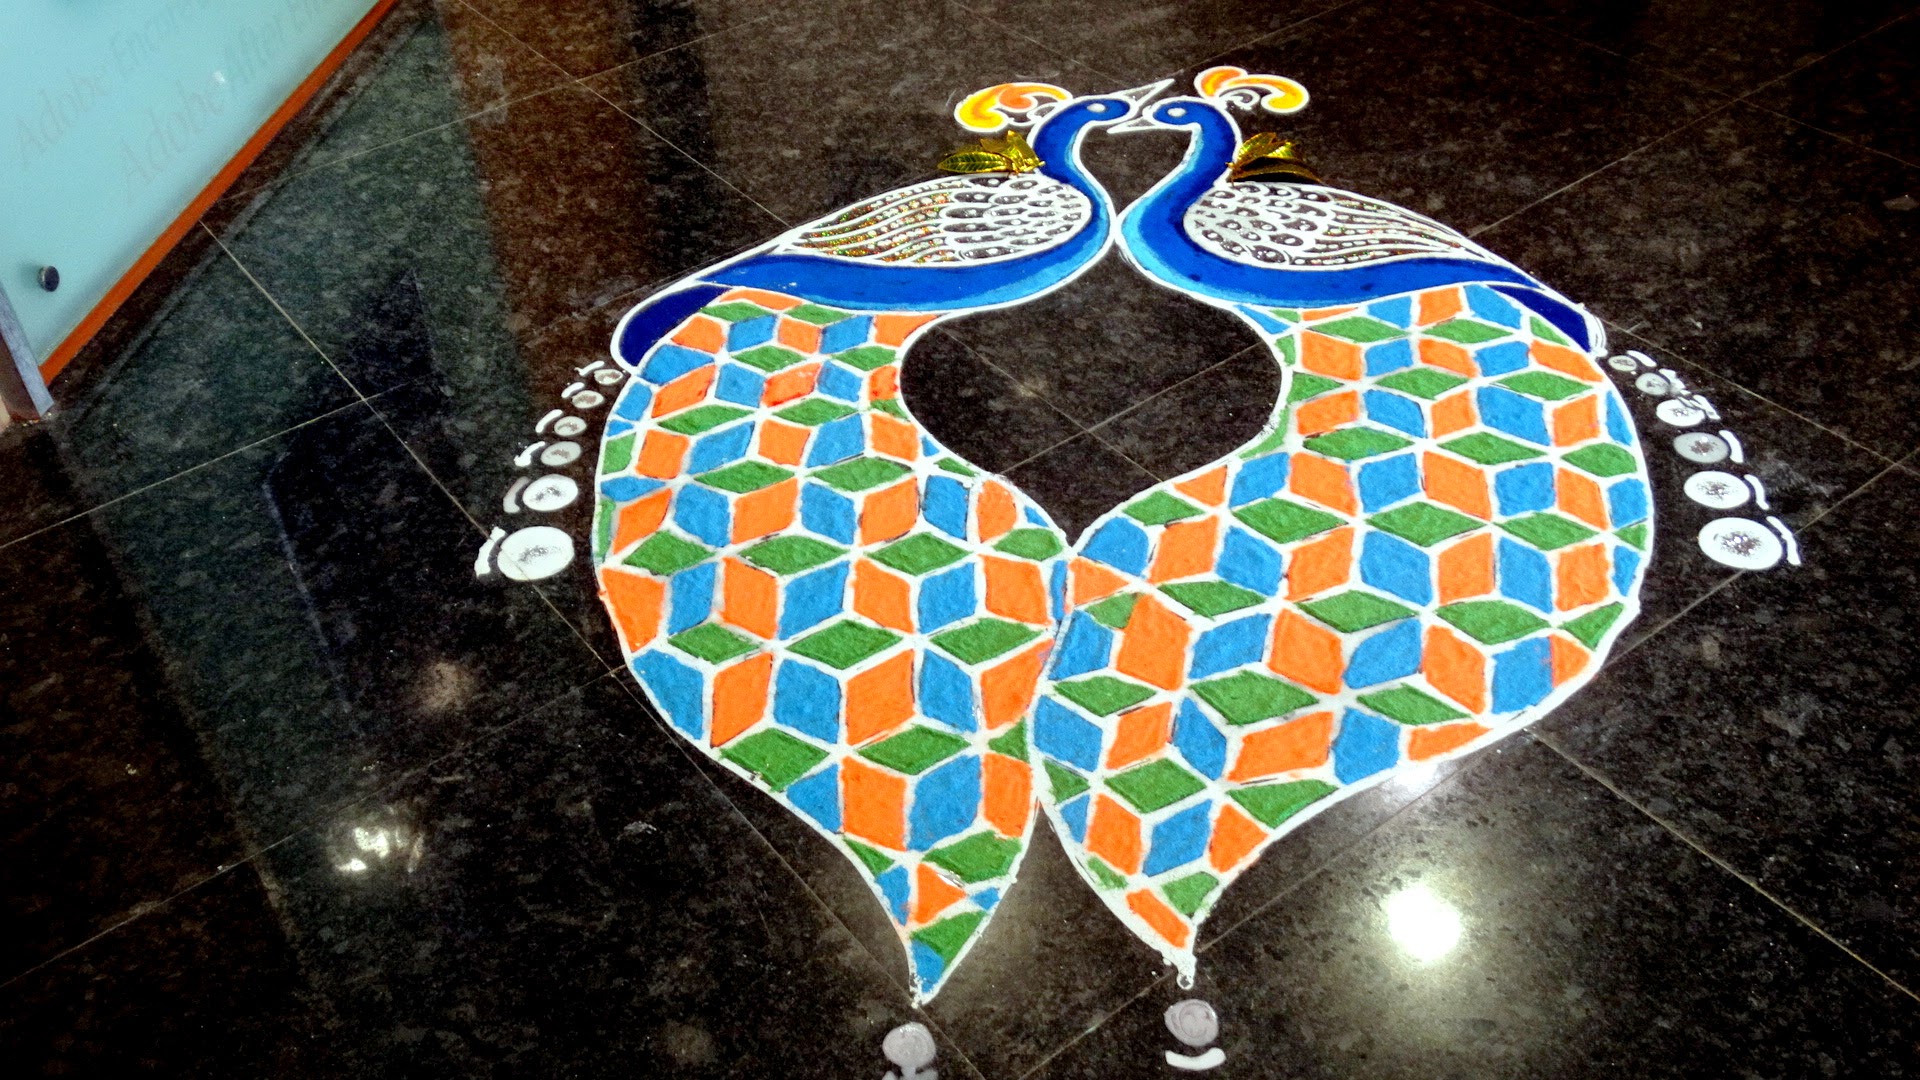 Rangoli is a traditional decorative folk art of India. And the importance of these designs are different in different states of the country. In fact, Rangoli designs are made in different states of India during different occasions & festivals. These are decorative designs made on floors of living rooms and courtyards during Hindu festivals and are meant as sacred welcoming areas for the Hindu deities. The ancient symbols have been passed on through the ages, from each generation to the one that followed, thus keeping both the art form and the tradition alive.